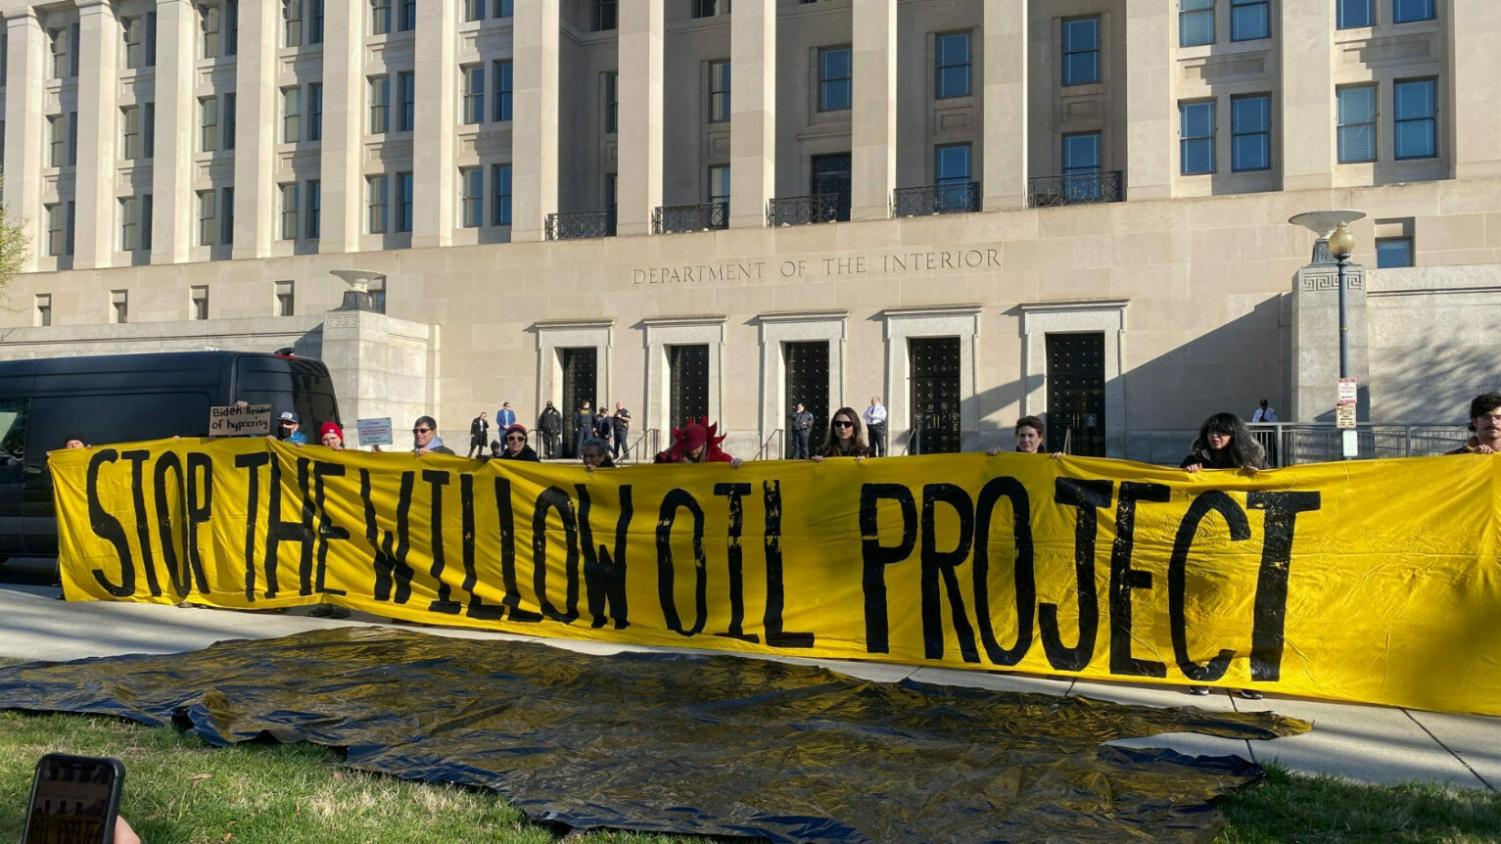 April 27, 2023 Stop The Willow Oil Project banner Photo by: NPR